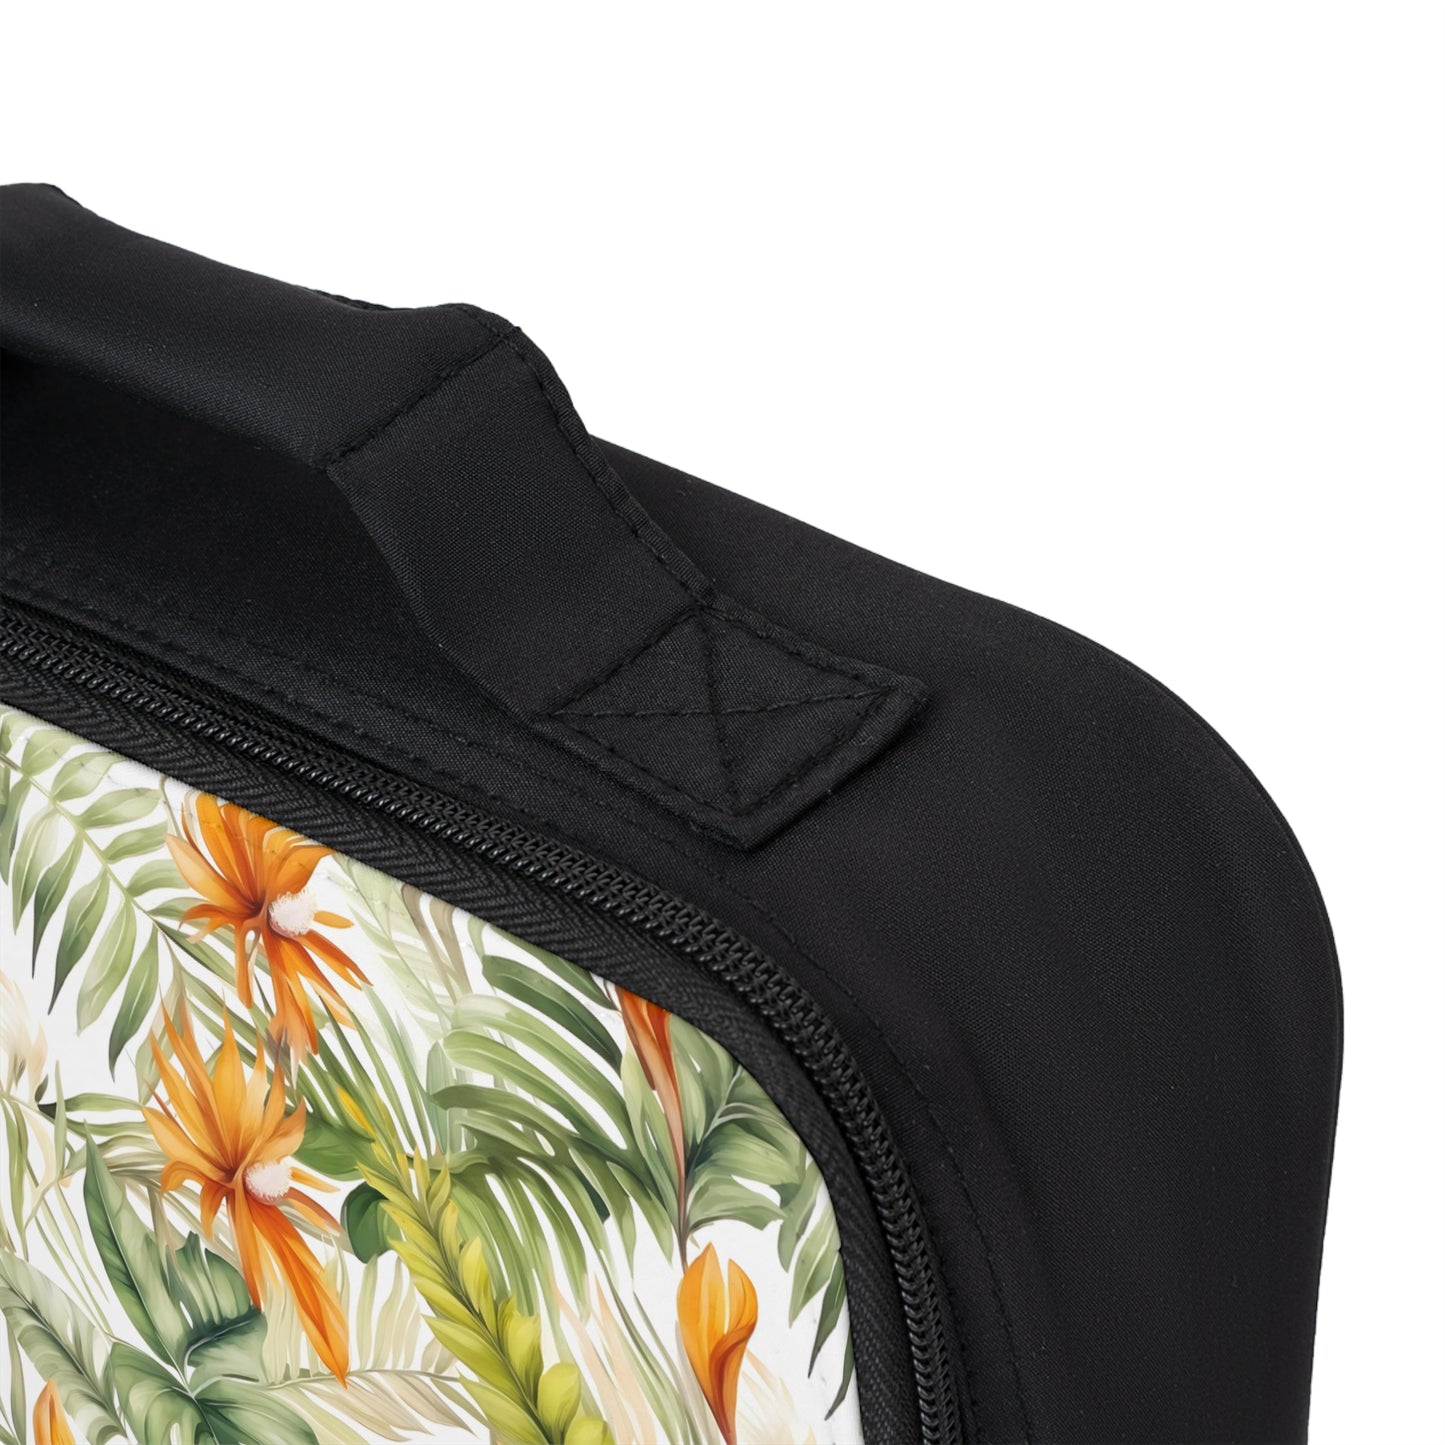 Tropical Adventure Lunch Bag